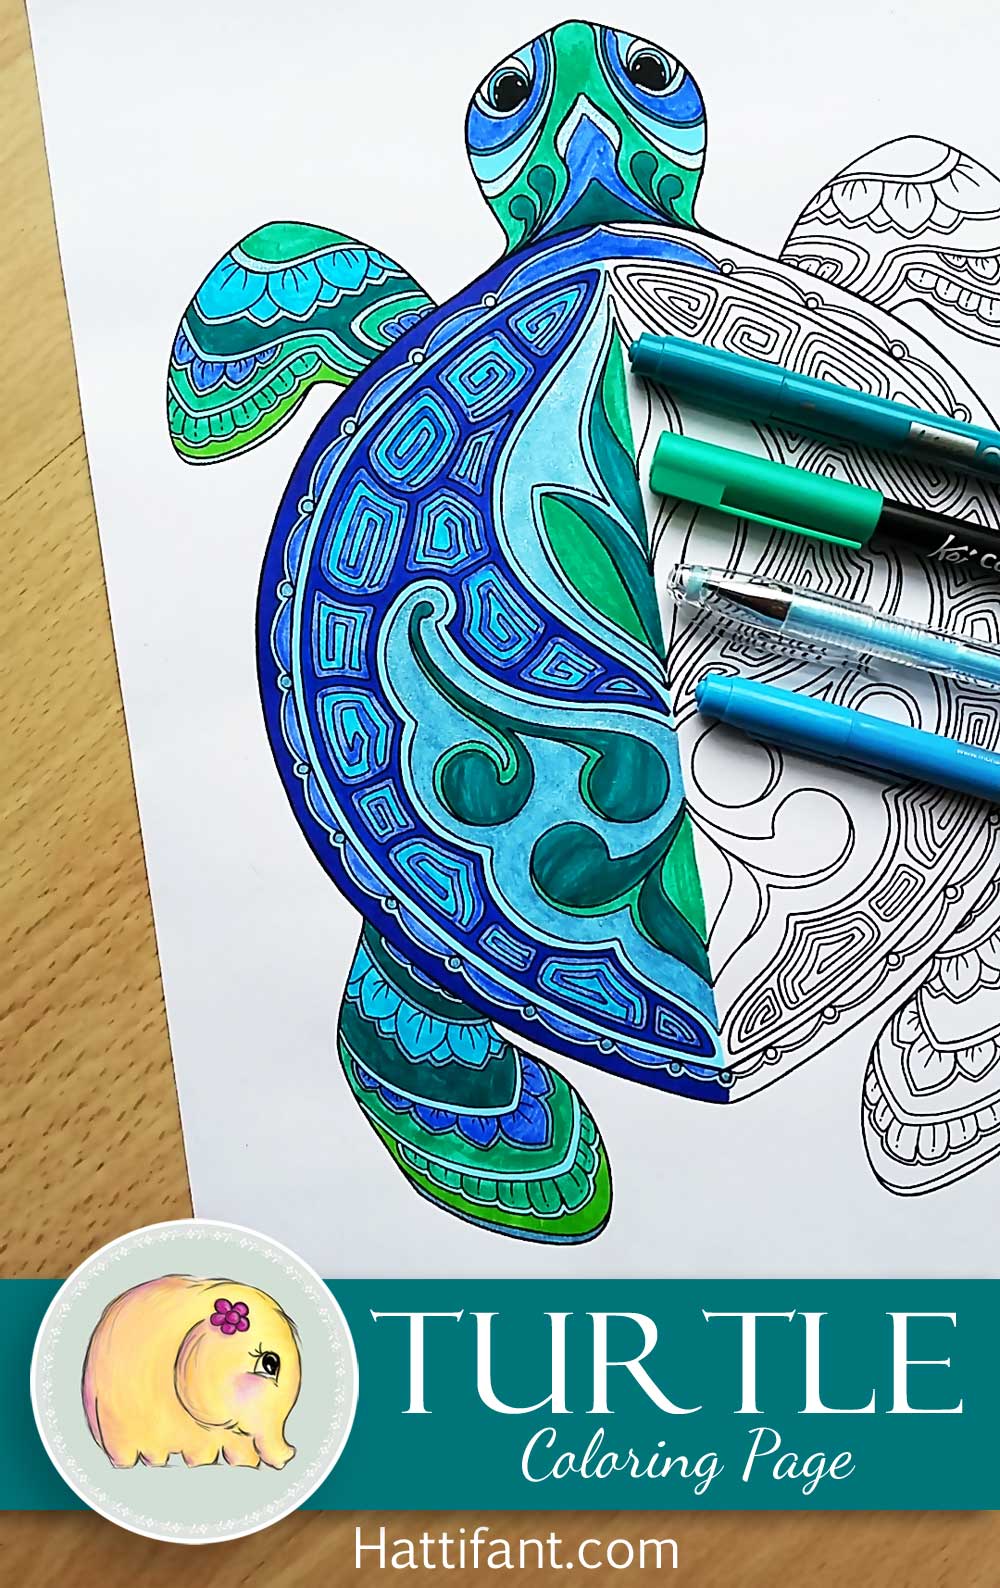 Hattifant's Turtle Coloring Page to download